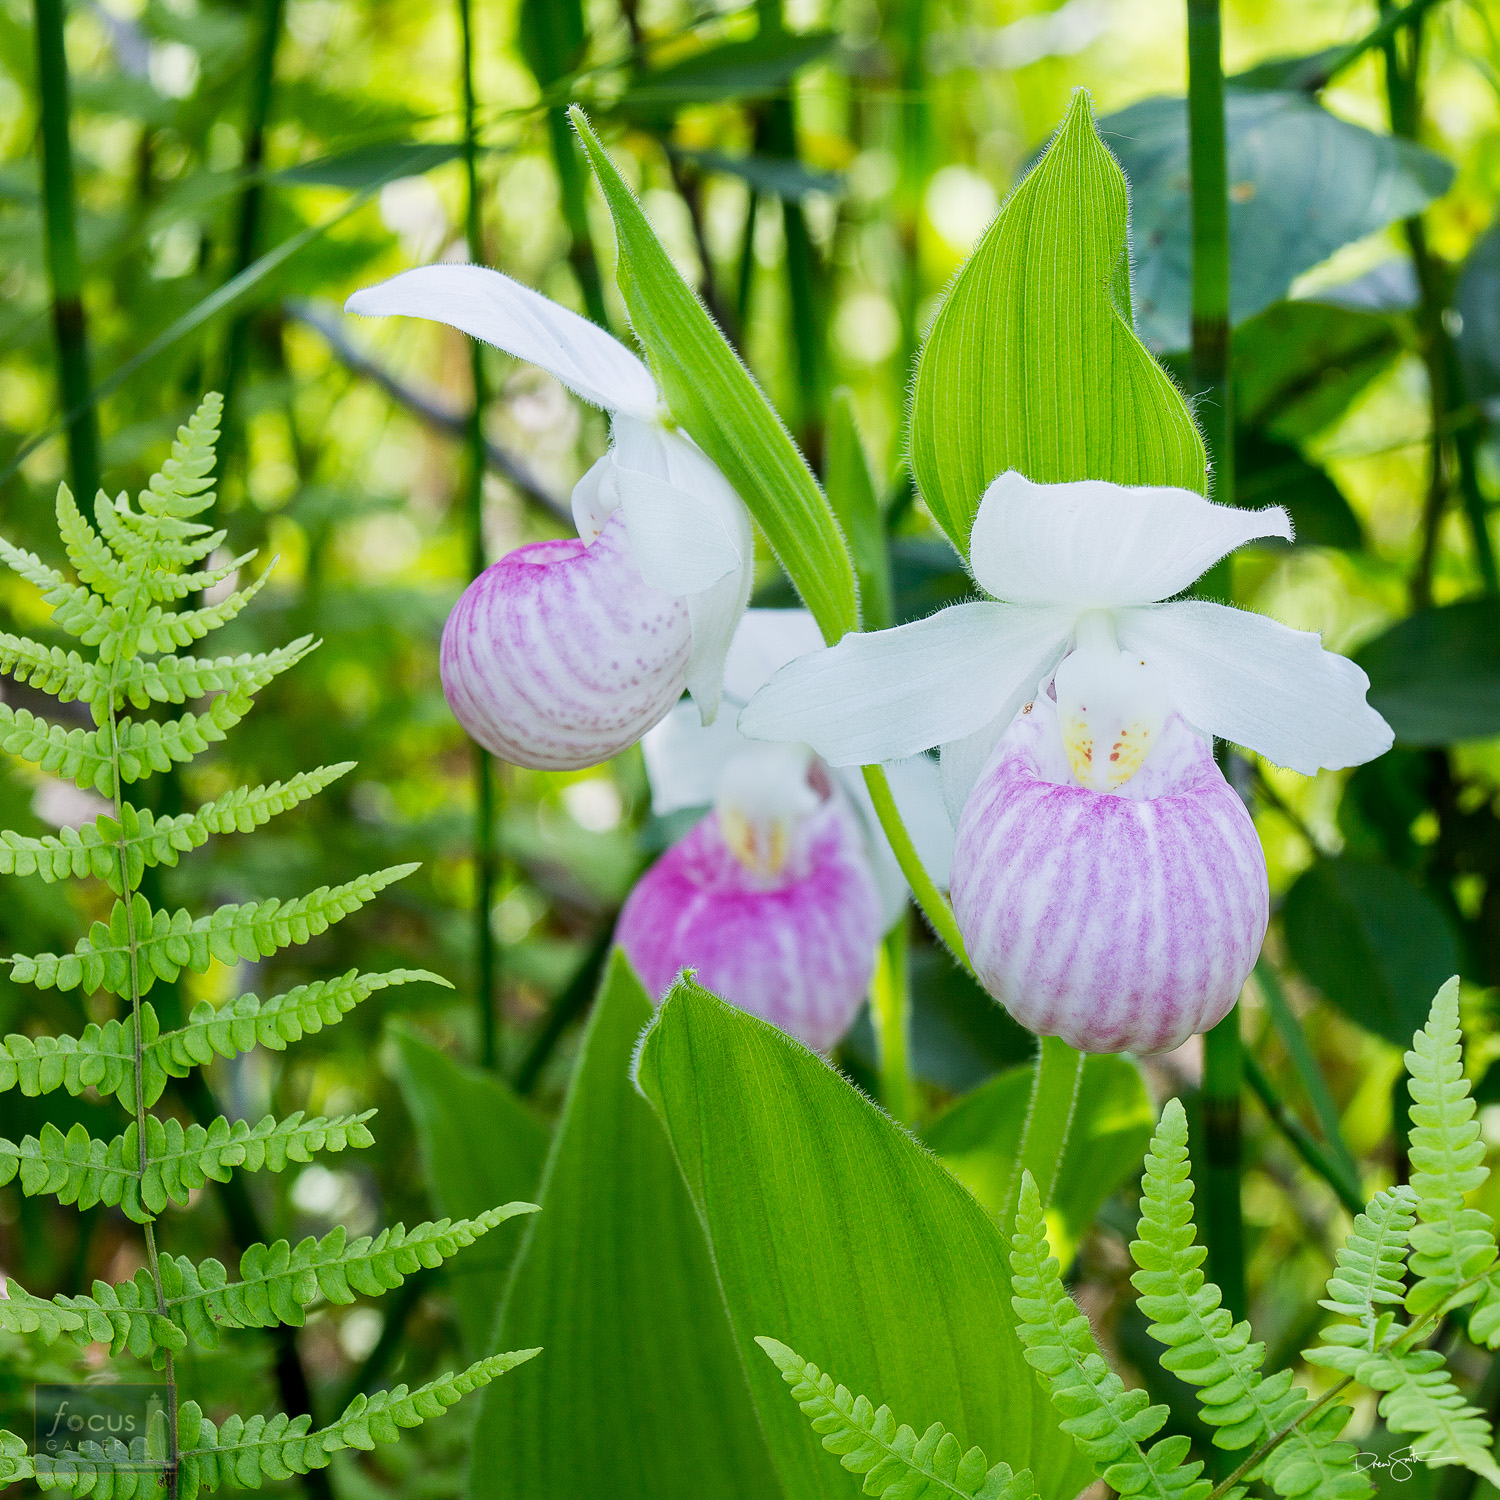 Three Showy Lady's Slipper orchids and ferns.